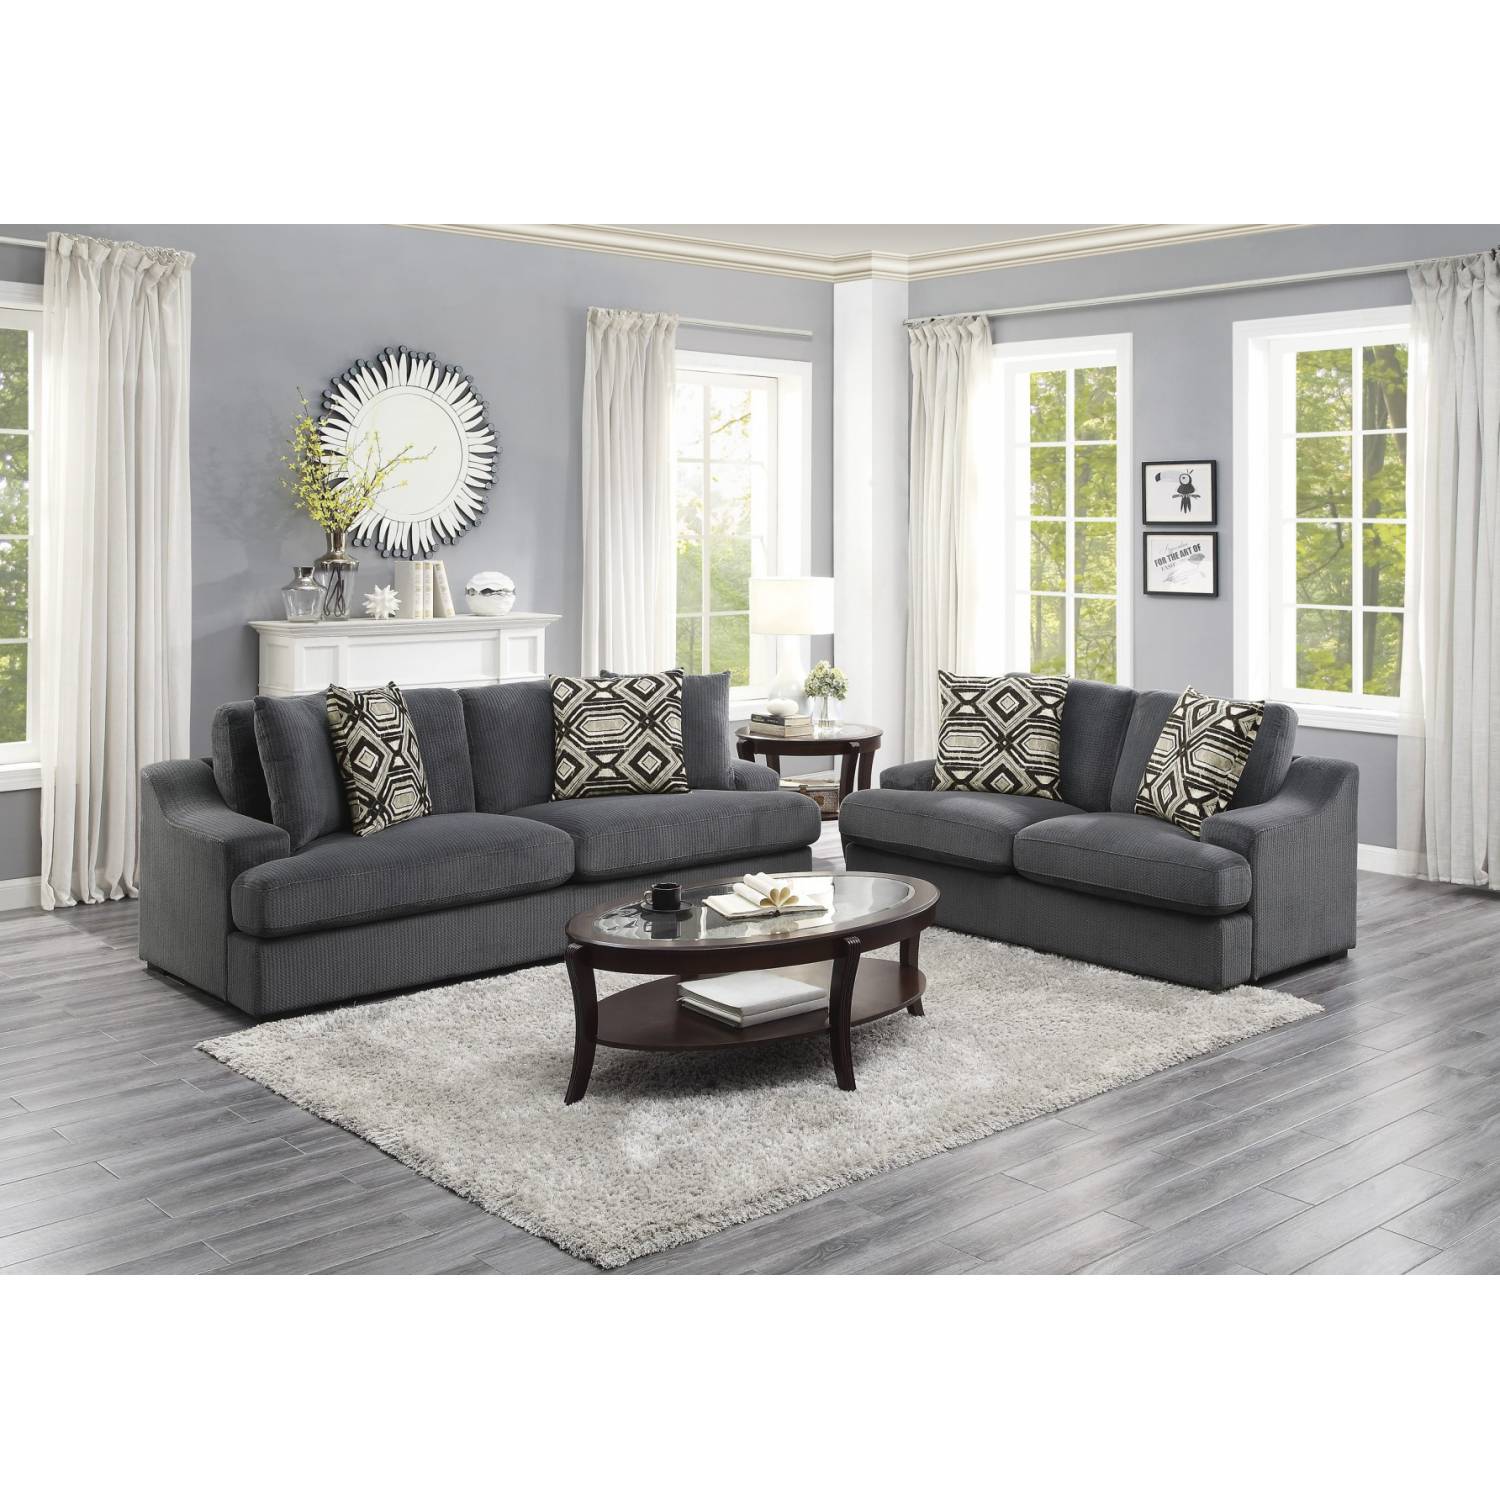 2 Piece Sectional Sofa Set with 3-Seater Sofa, Loveseat & 4 Pillows - Grey